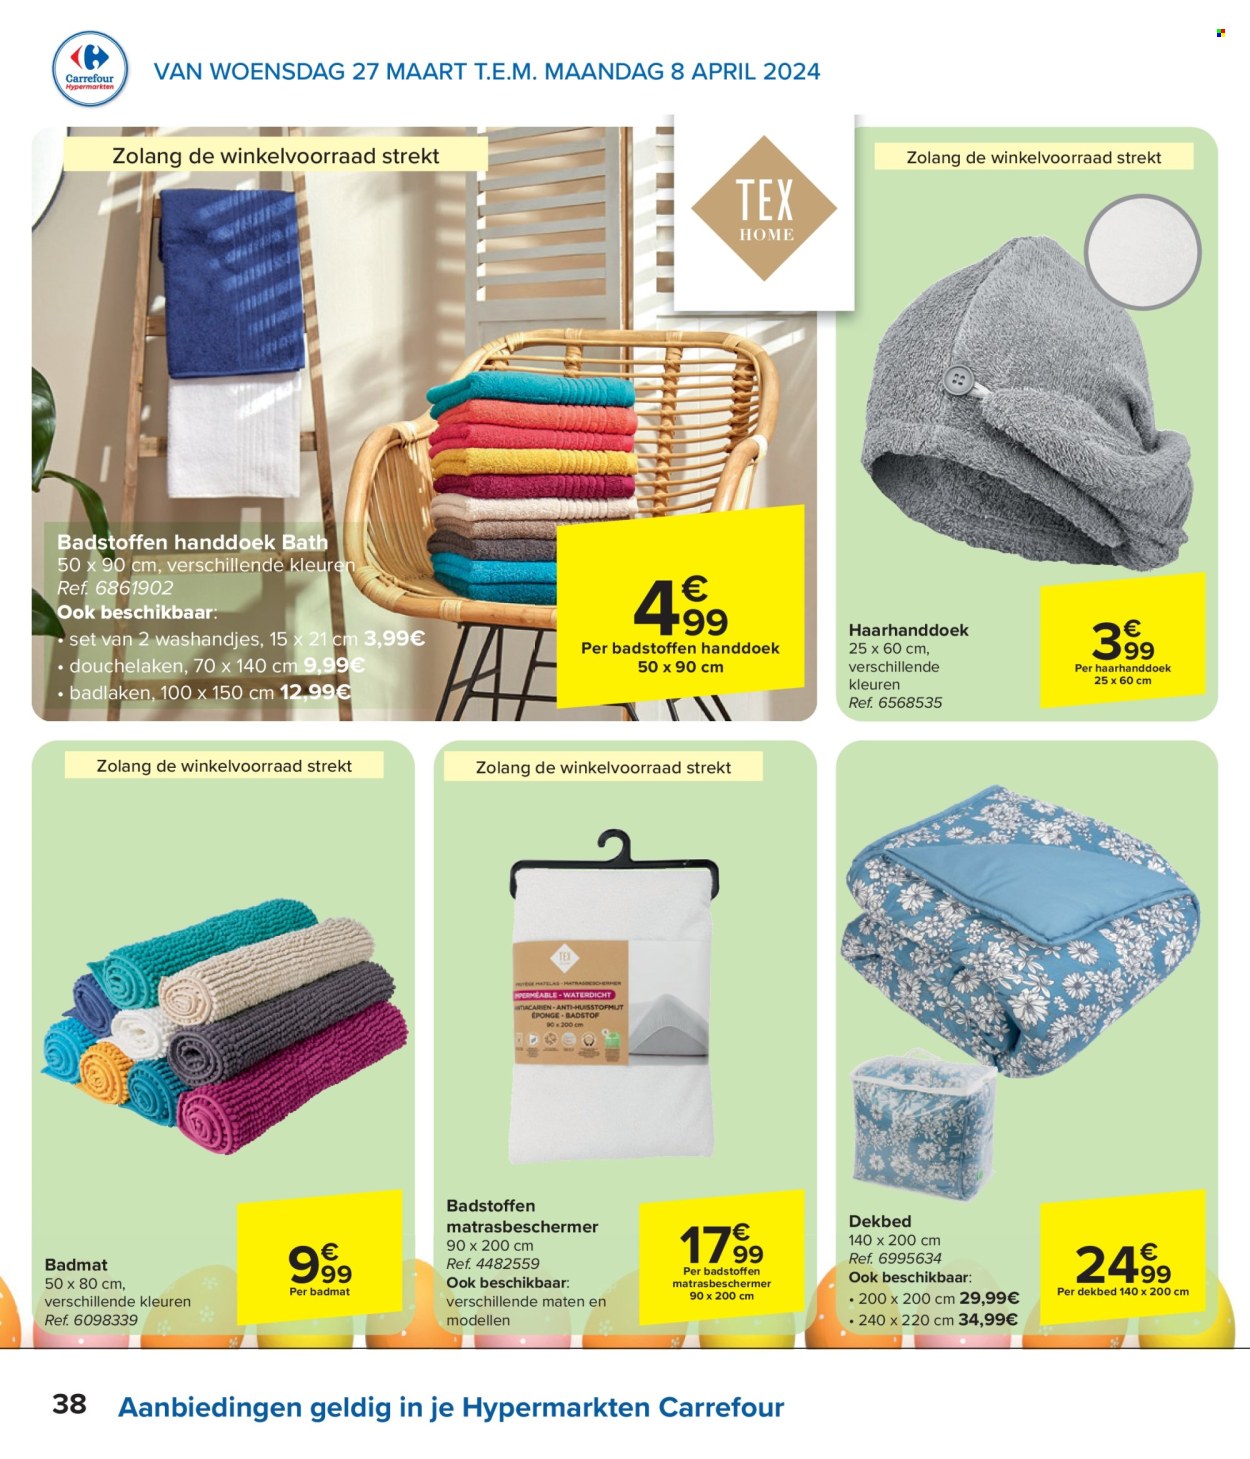 Catalogue Carrefour hypermarkt - 27.3.2024 - 8.4.2024. Page 38.